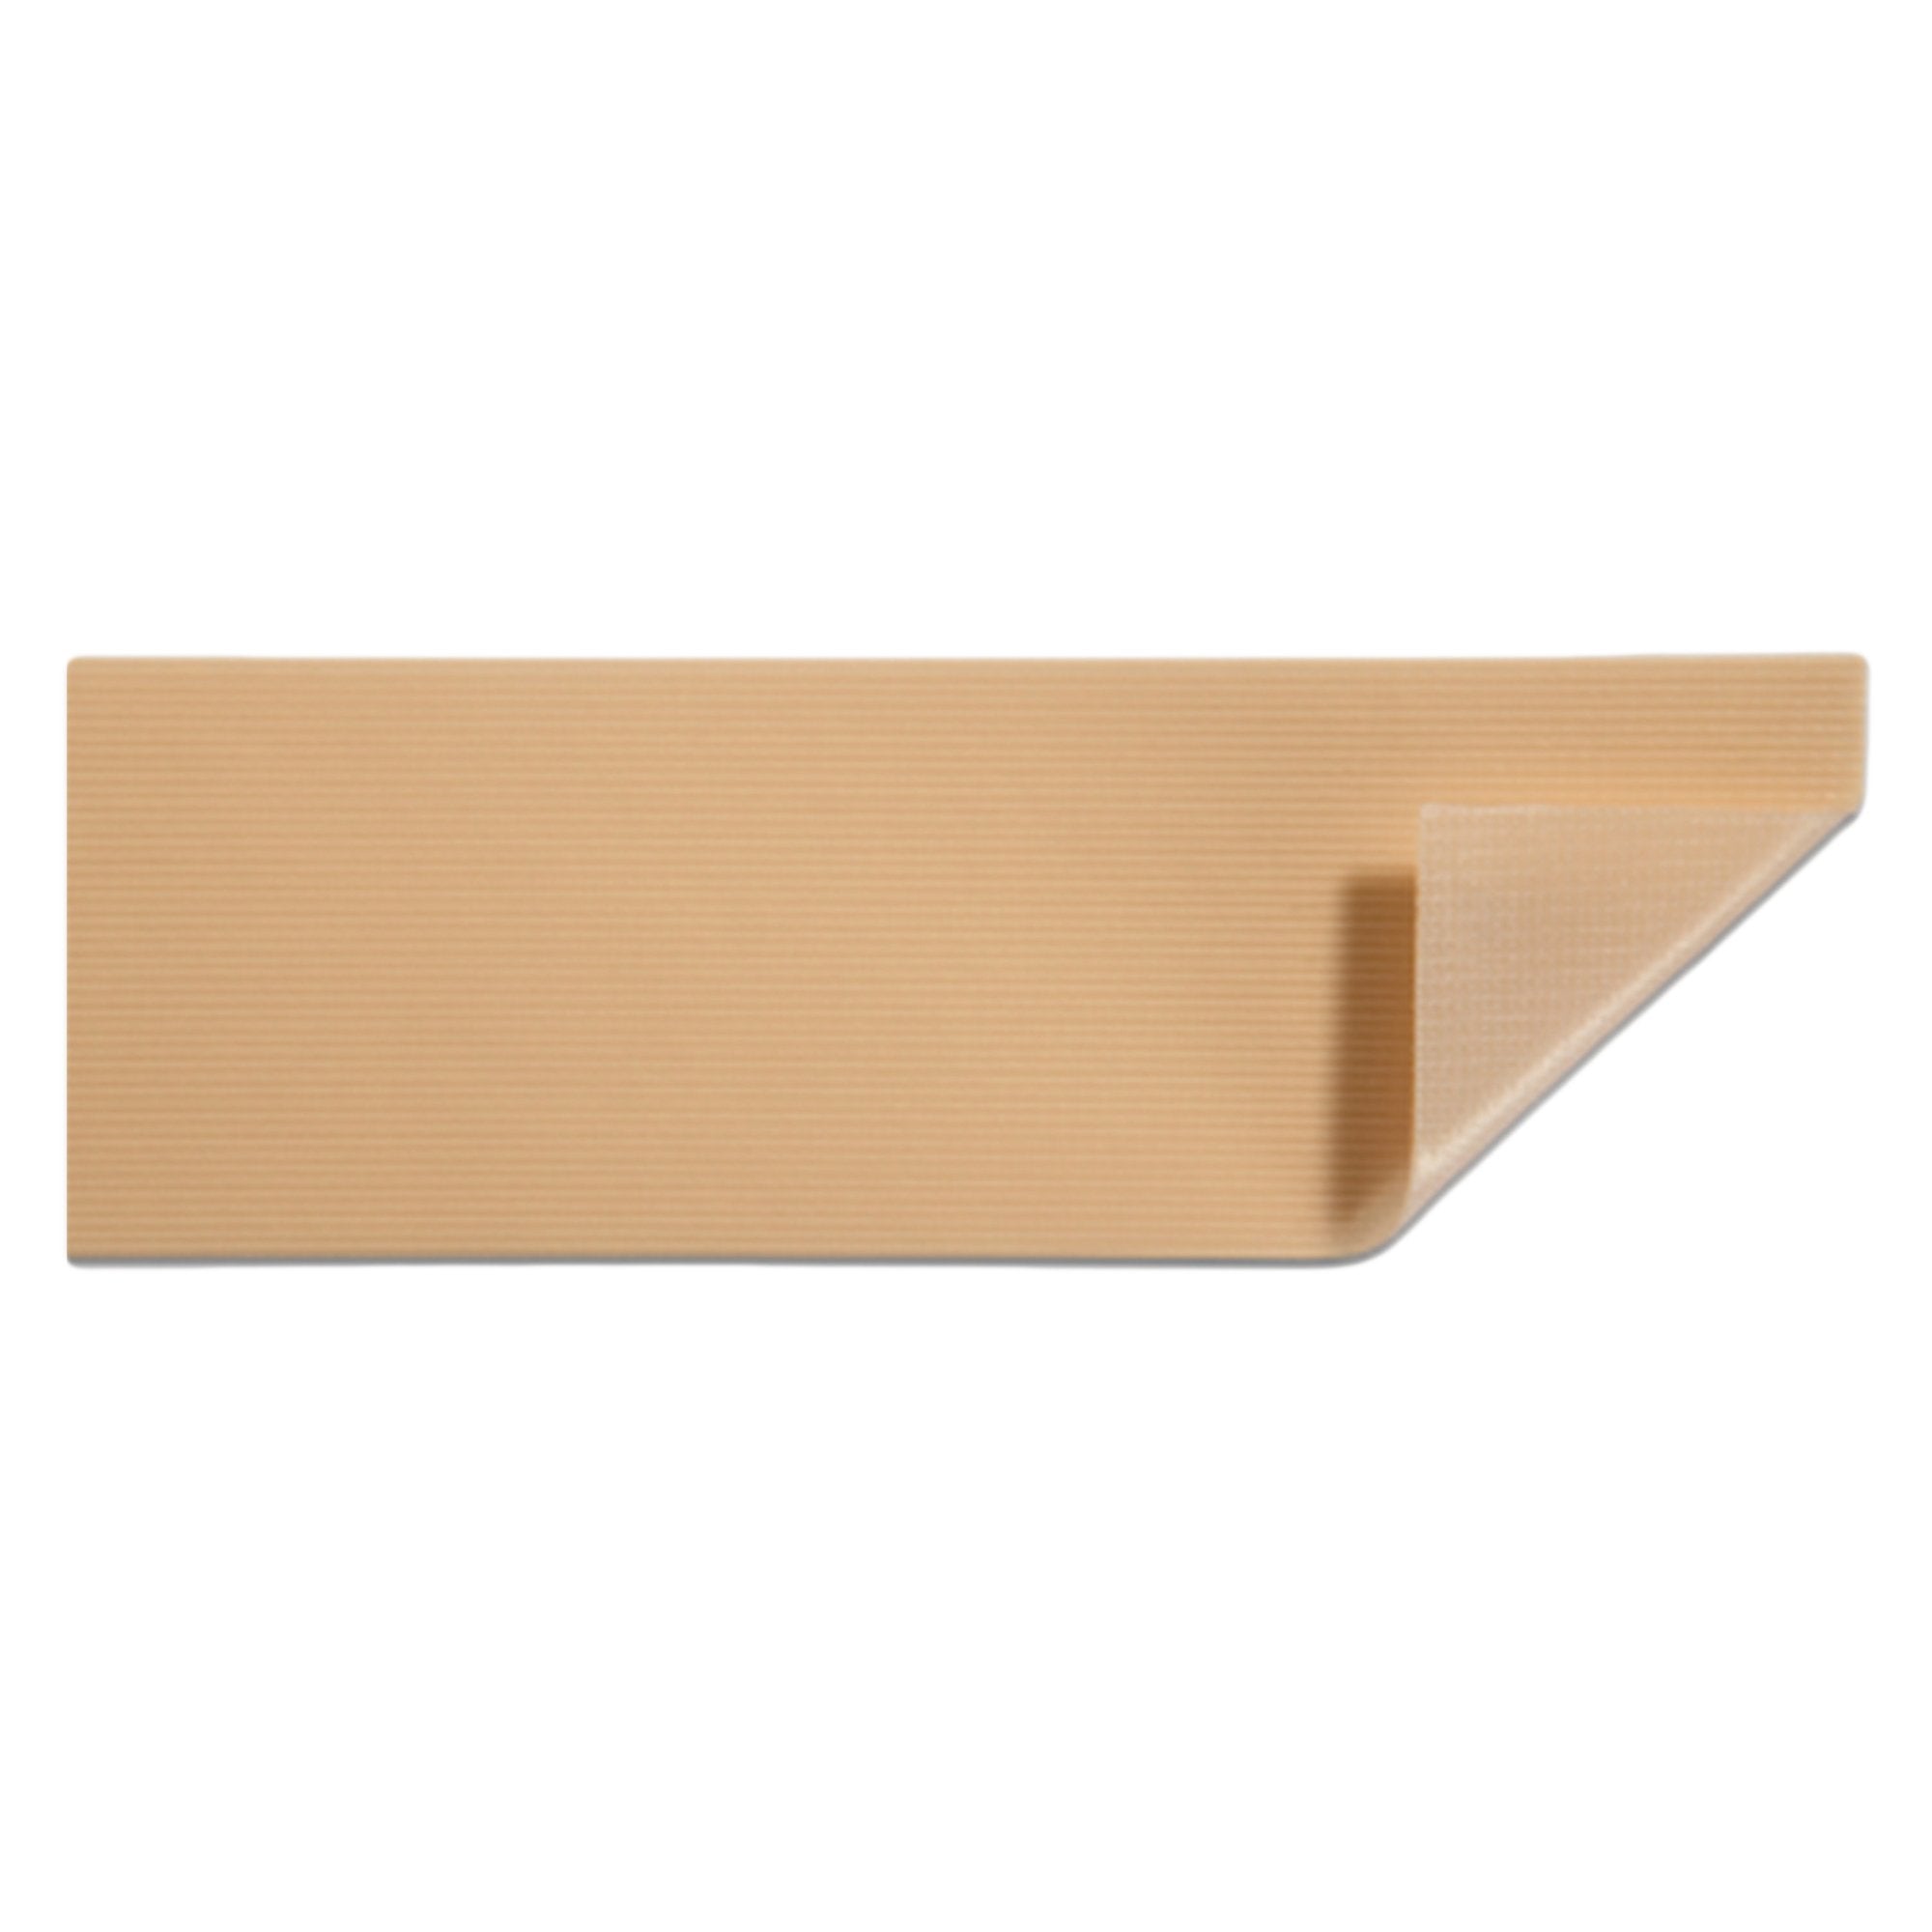 Medical Tape Mepitac® Tan 1-1/2 X 59 Inch Silicone NonSterile